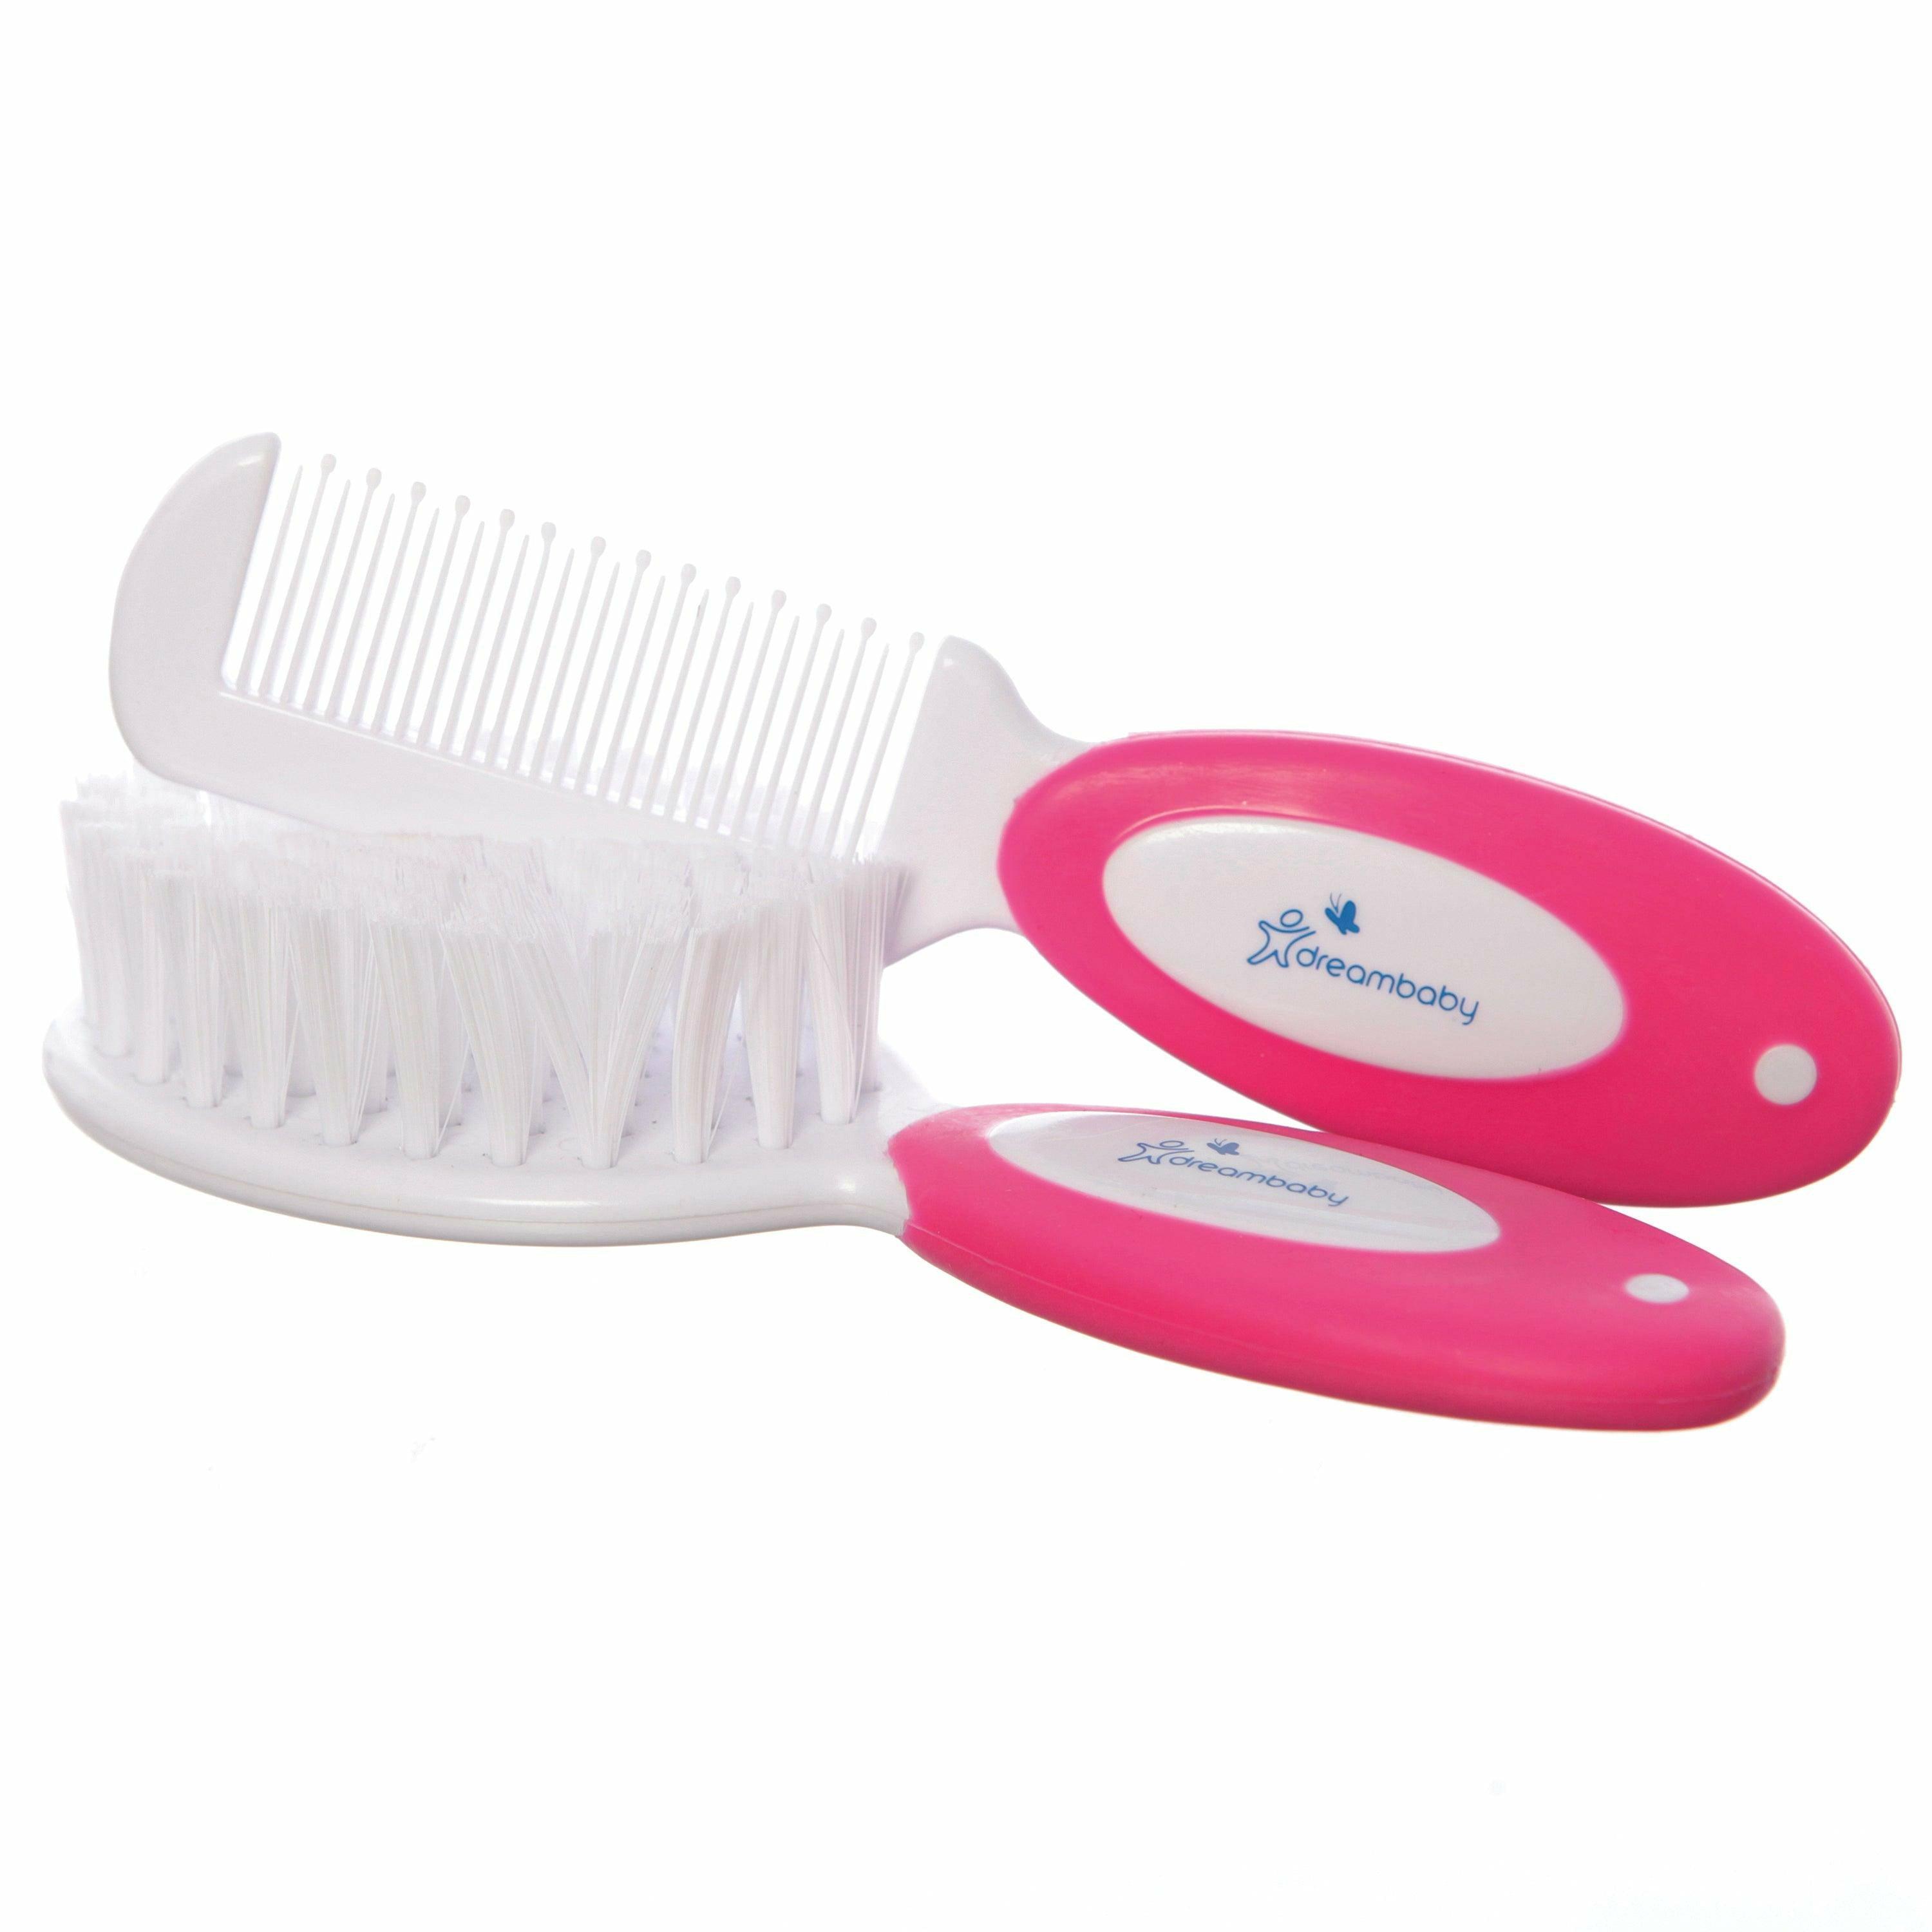 Dream baby G328 Deluxe Brush & Comb Set For Girls - BumbleToys - 0-24 Months, Babies, Baby Saftey & Health, Cecil, Girls